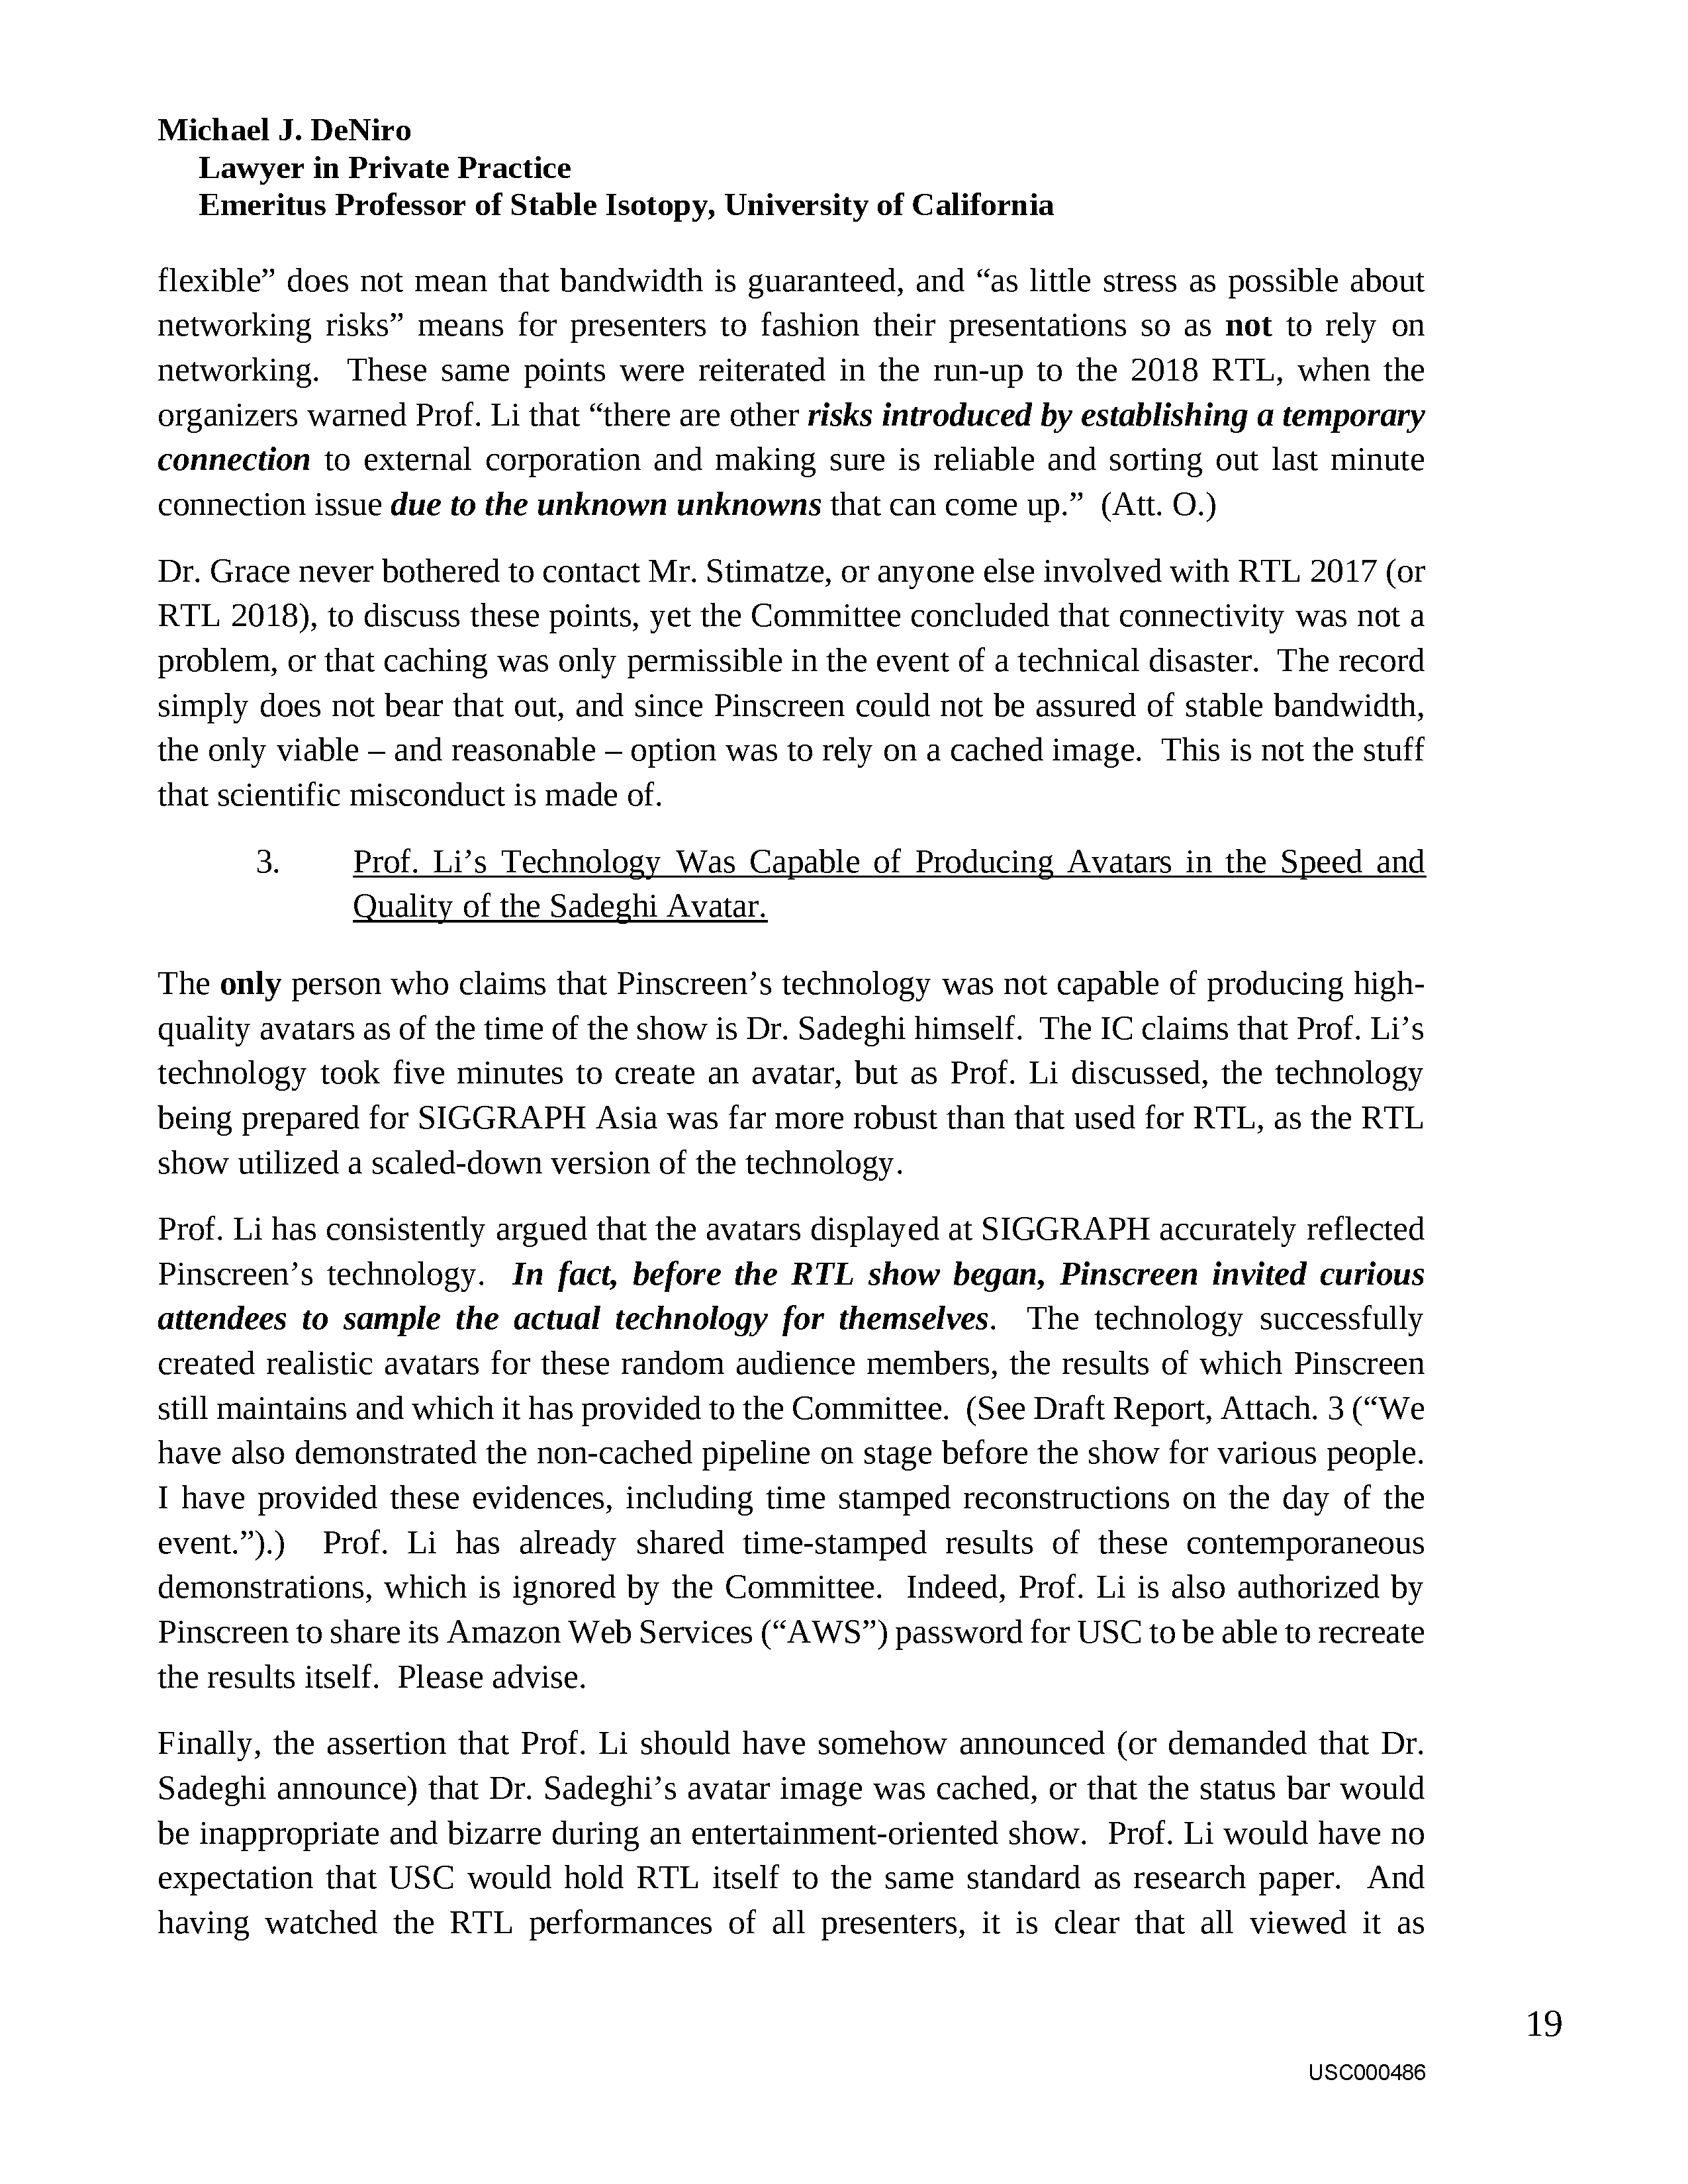 USC's Investigation Report re Hao Li's and Pinscreen's Scientific Misconduct at ACM SIGGRAPH RTL 2017 - Full Report Page 488